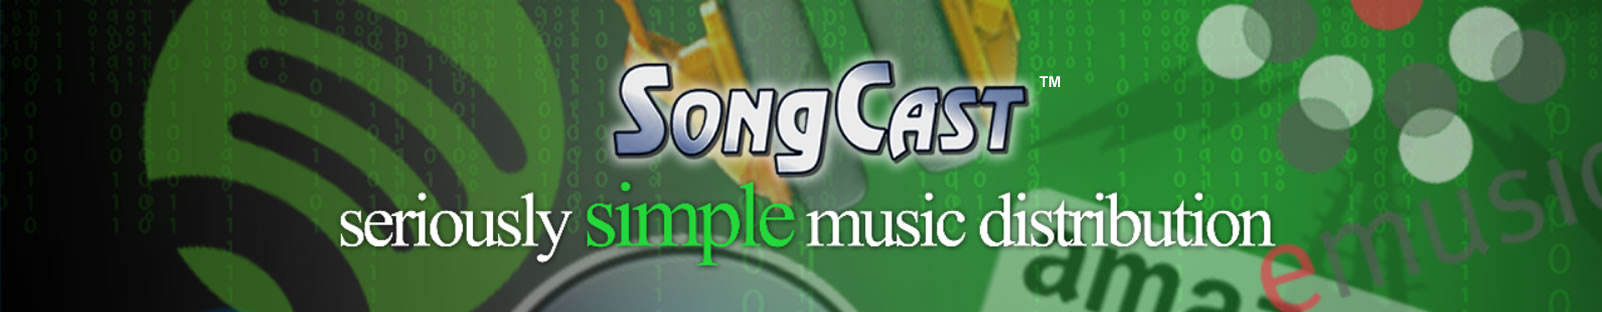 SongCast Promotion